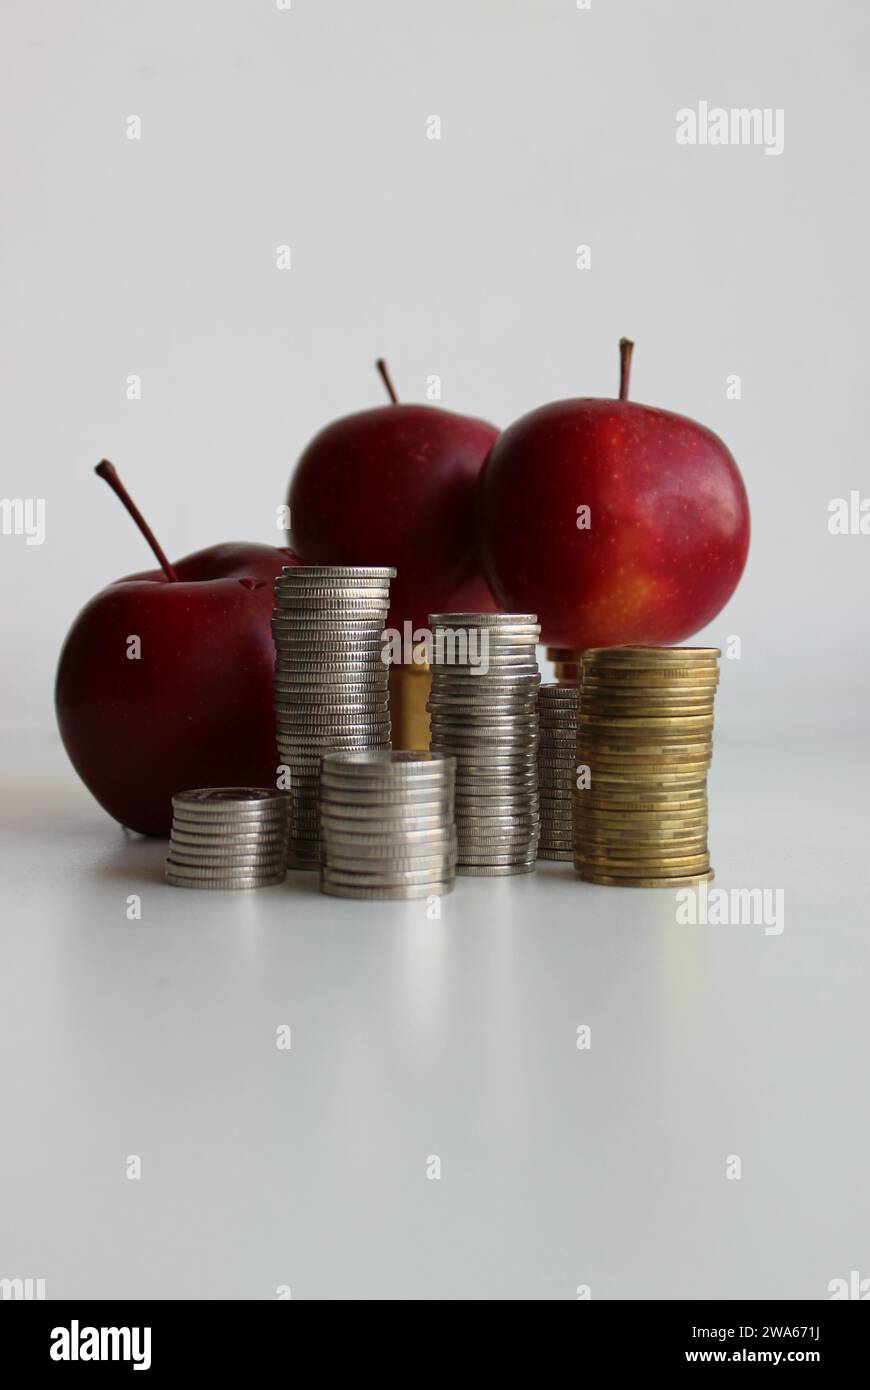 Columns of coins in front of red apples as an illustration of seasonal fruits cost Stock Photo